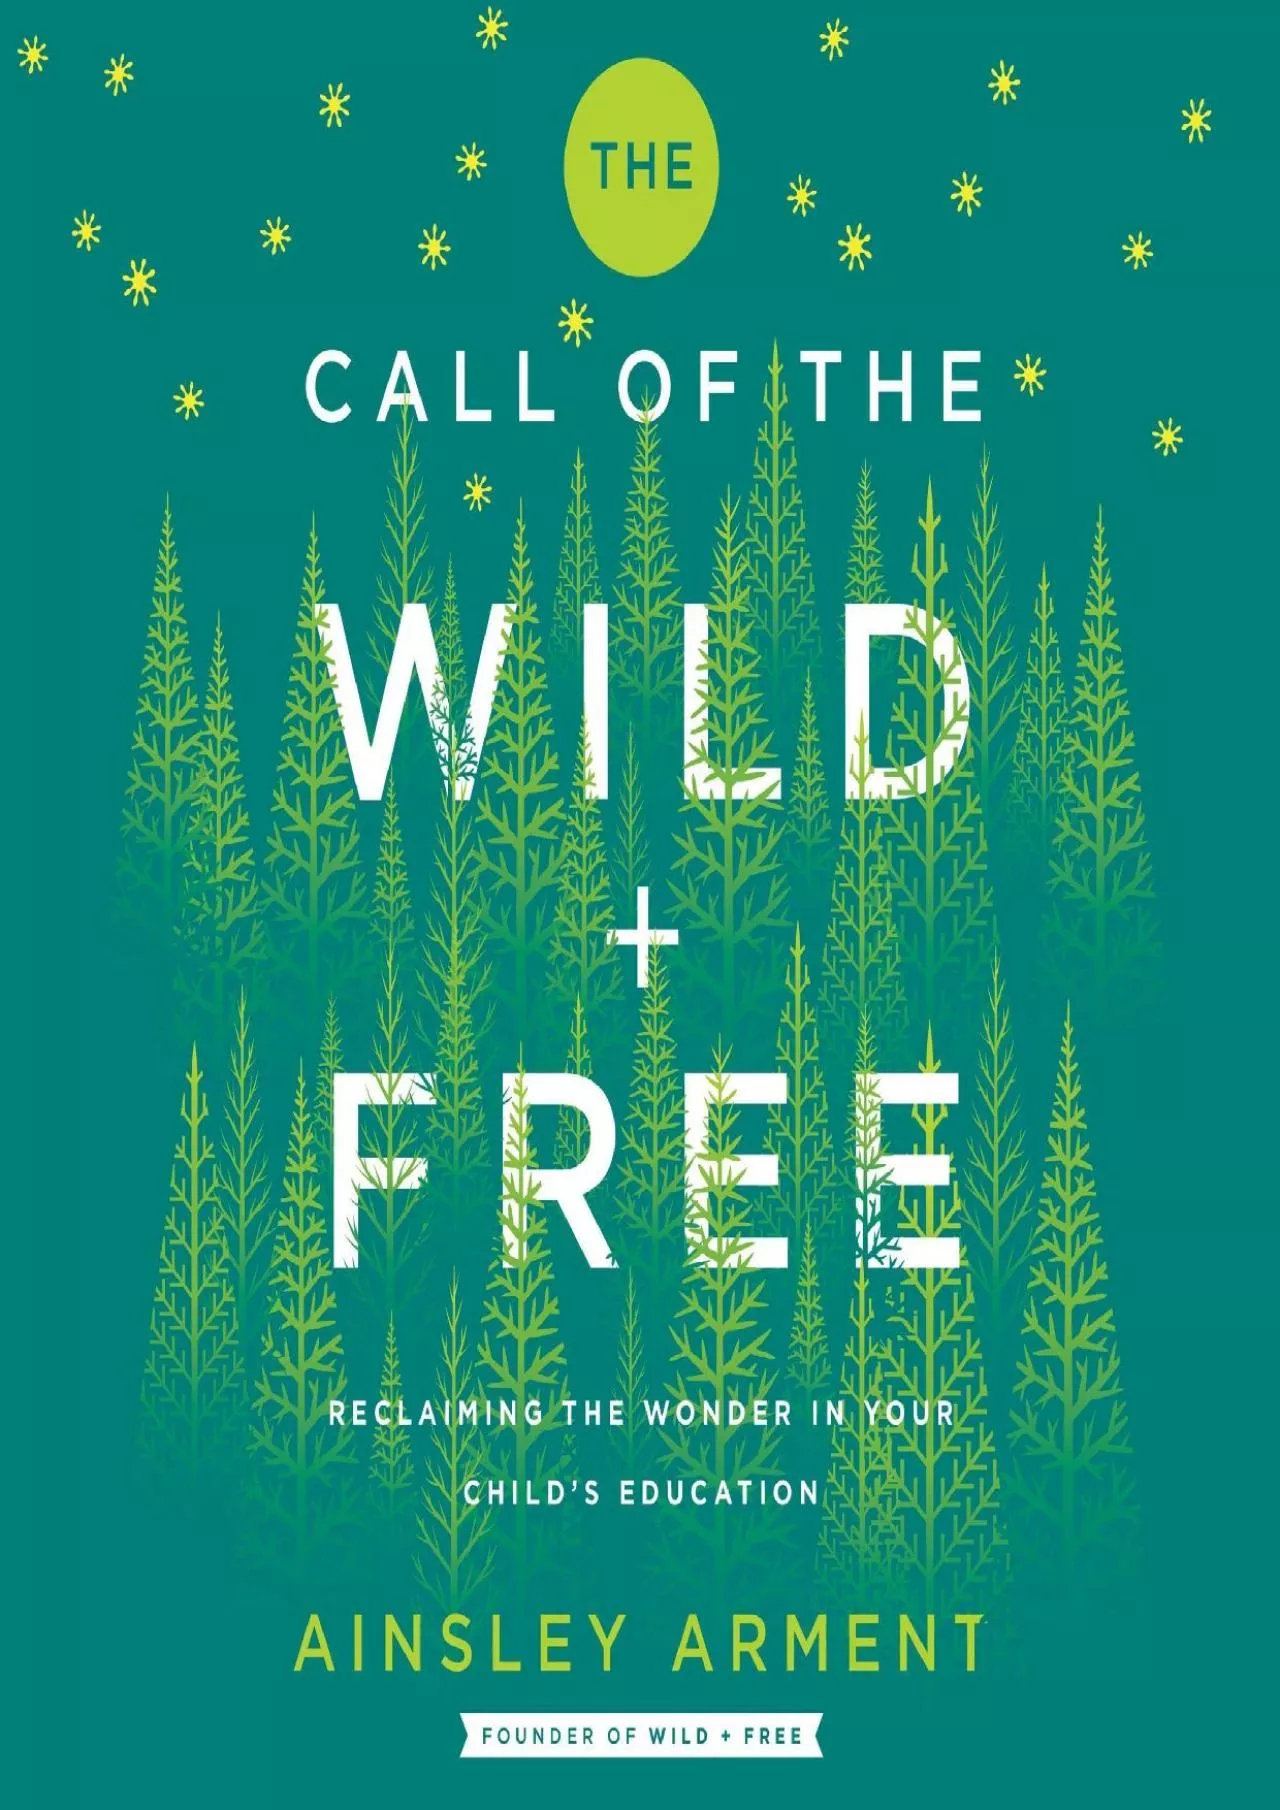 [DOWNLOAD] The Call of the Wild and Free: Reclaiming the Wonder in Your Child’s Education,